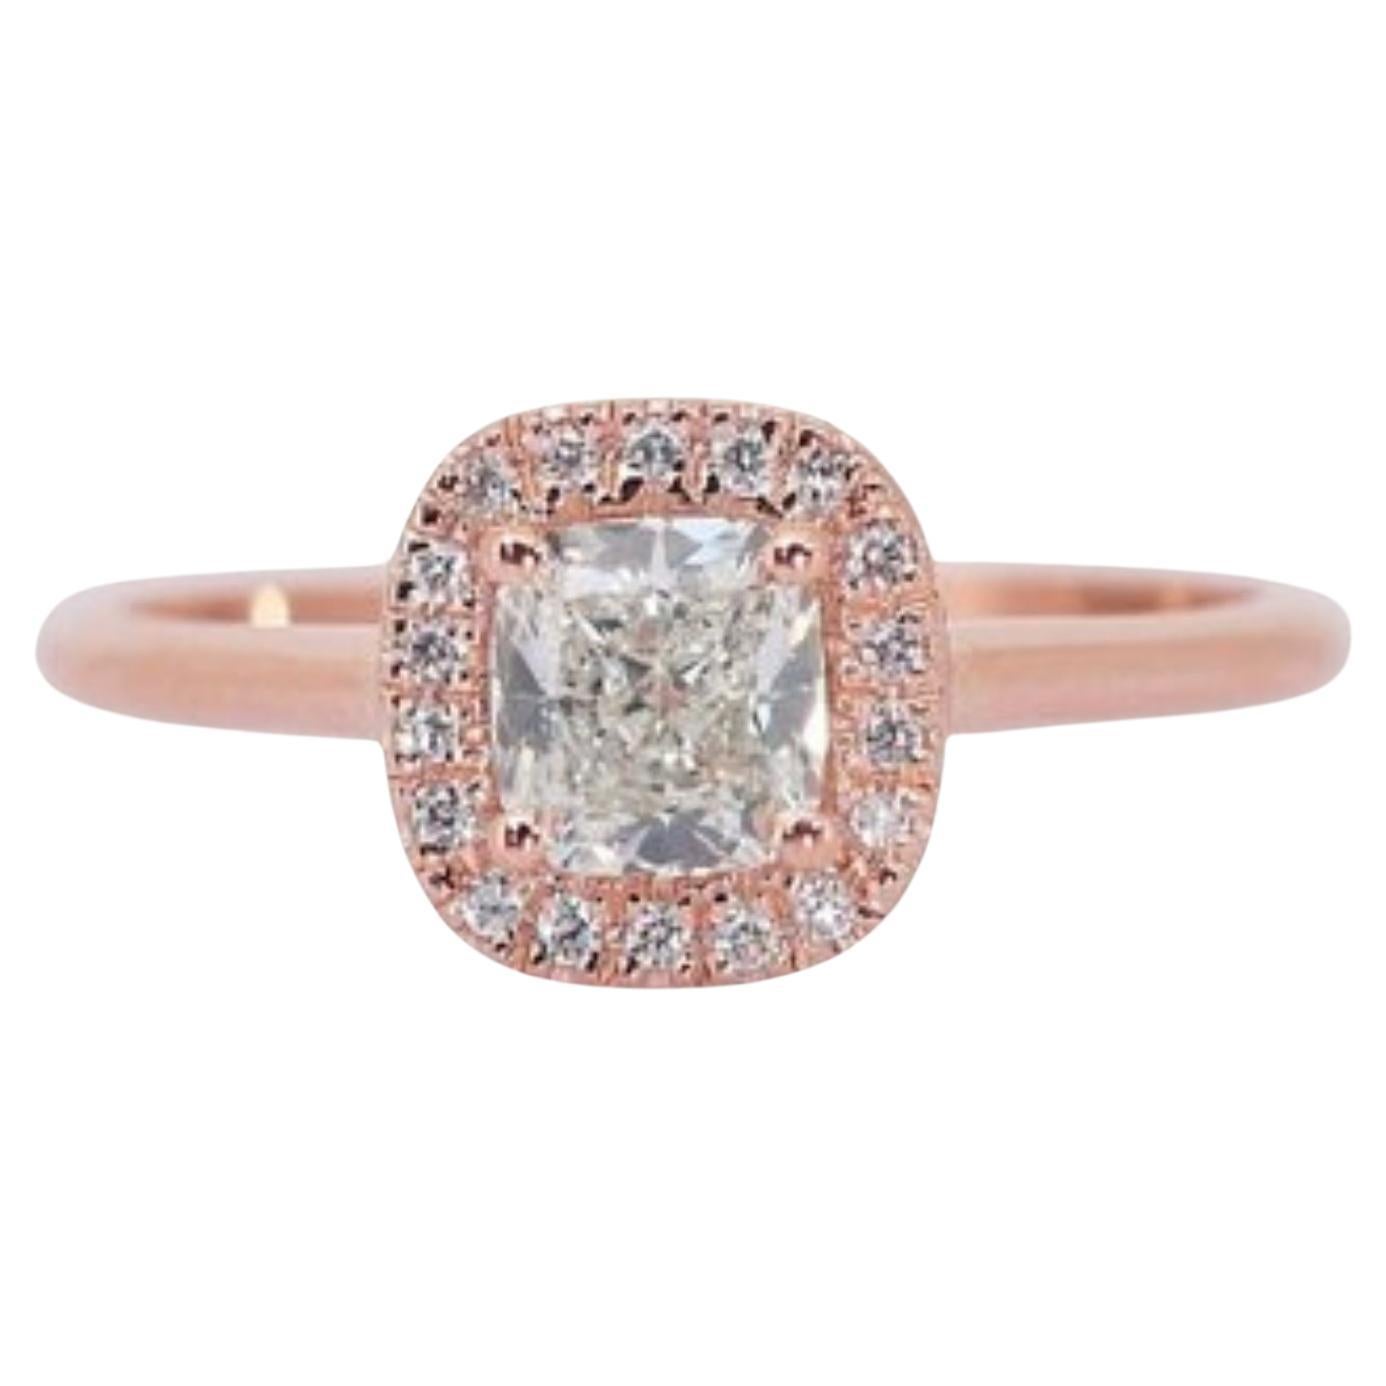 Romantic  1 Carat Cushion Diamond Ring with Dazzling Side Stones in 18K Pink Gol For Sale